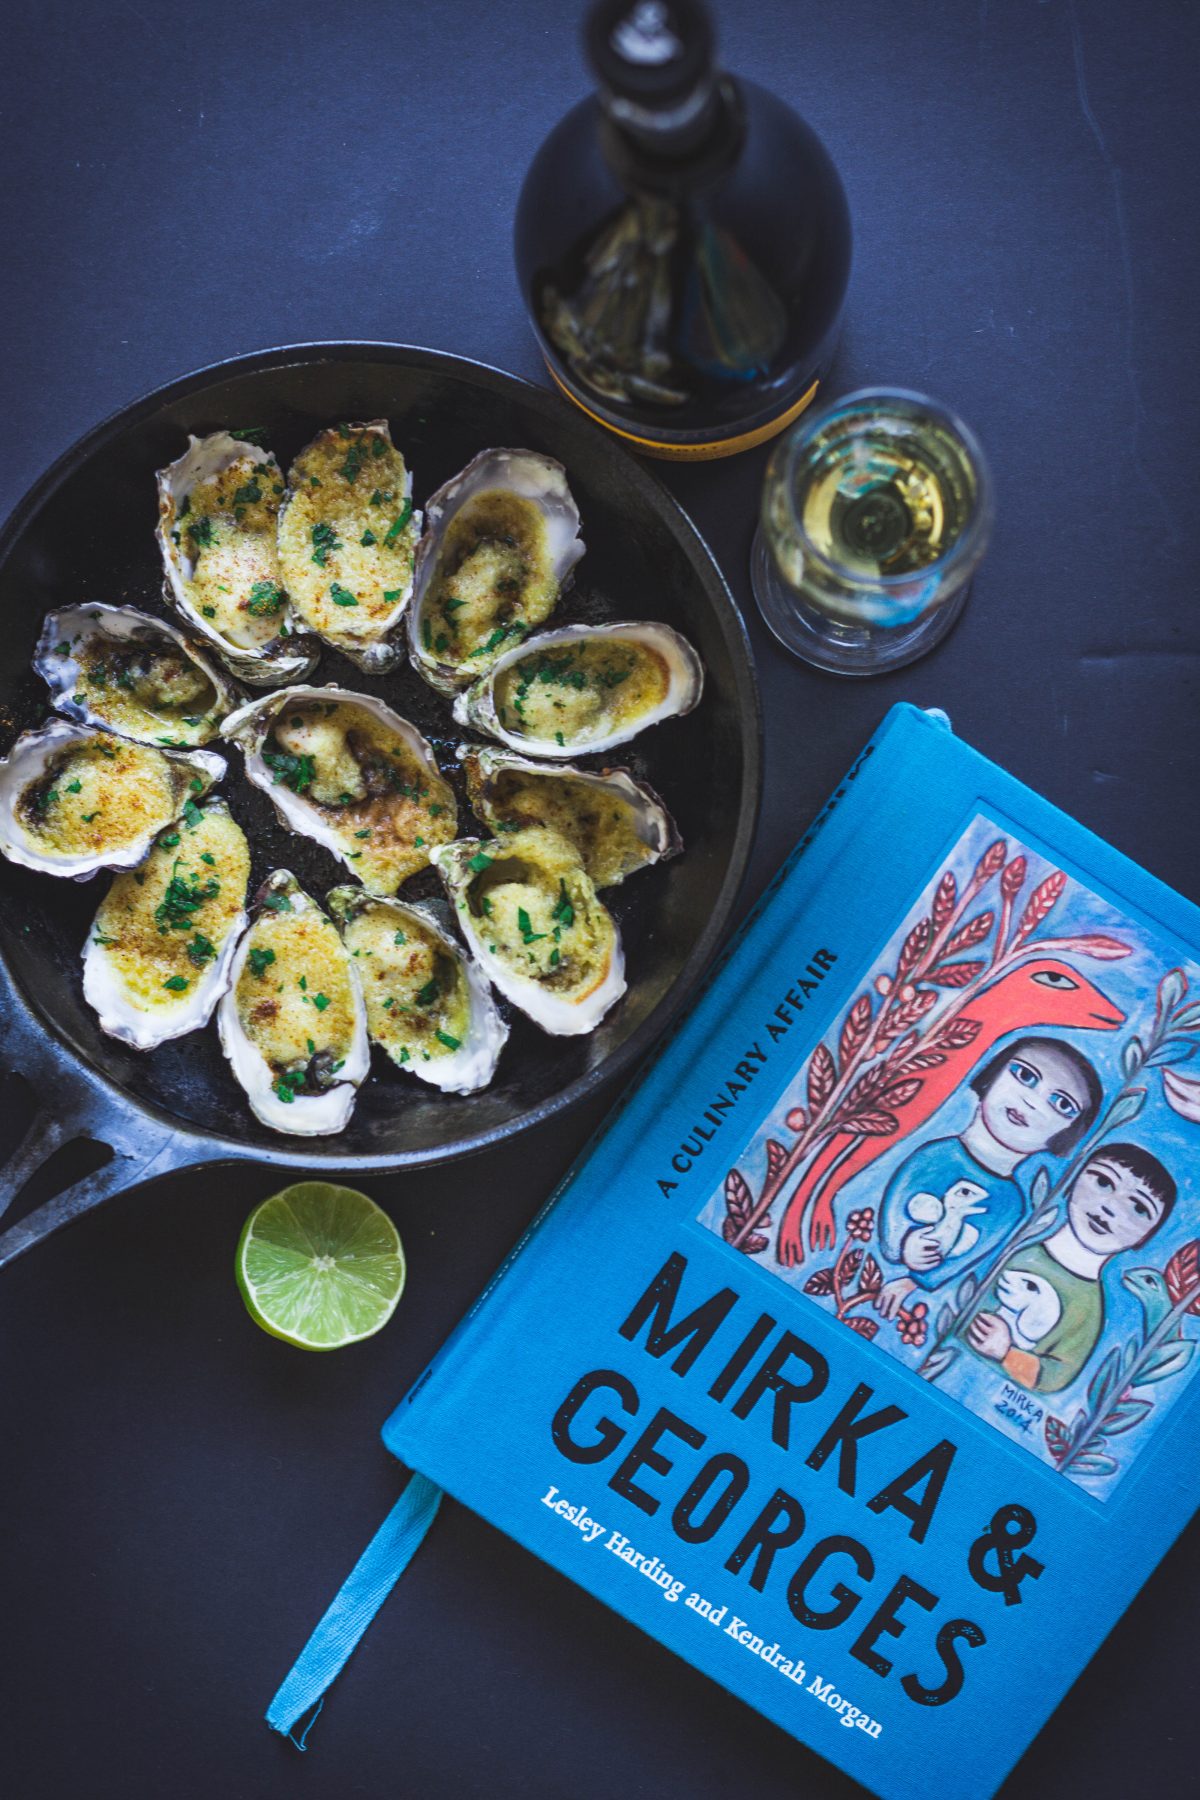 Mirka & Georges – A Culinary Affair by Lesley Harding and Kendrah Morgan (+ a recipe for Oysters roasted with Almonds and Butter) - thespiceadventuress.com